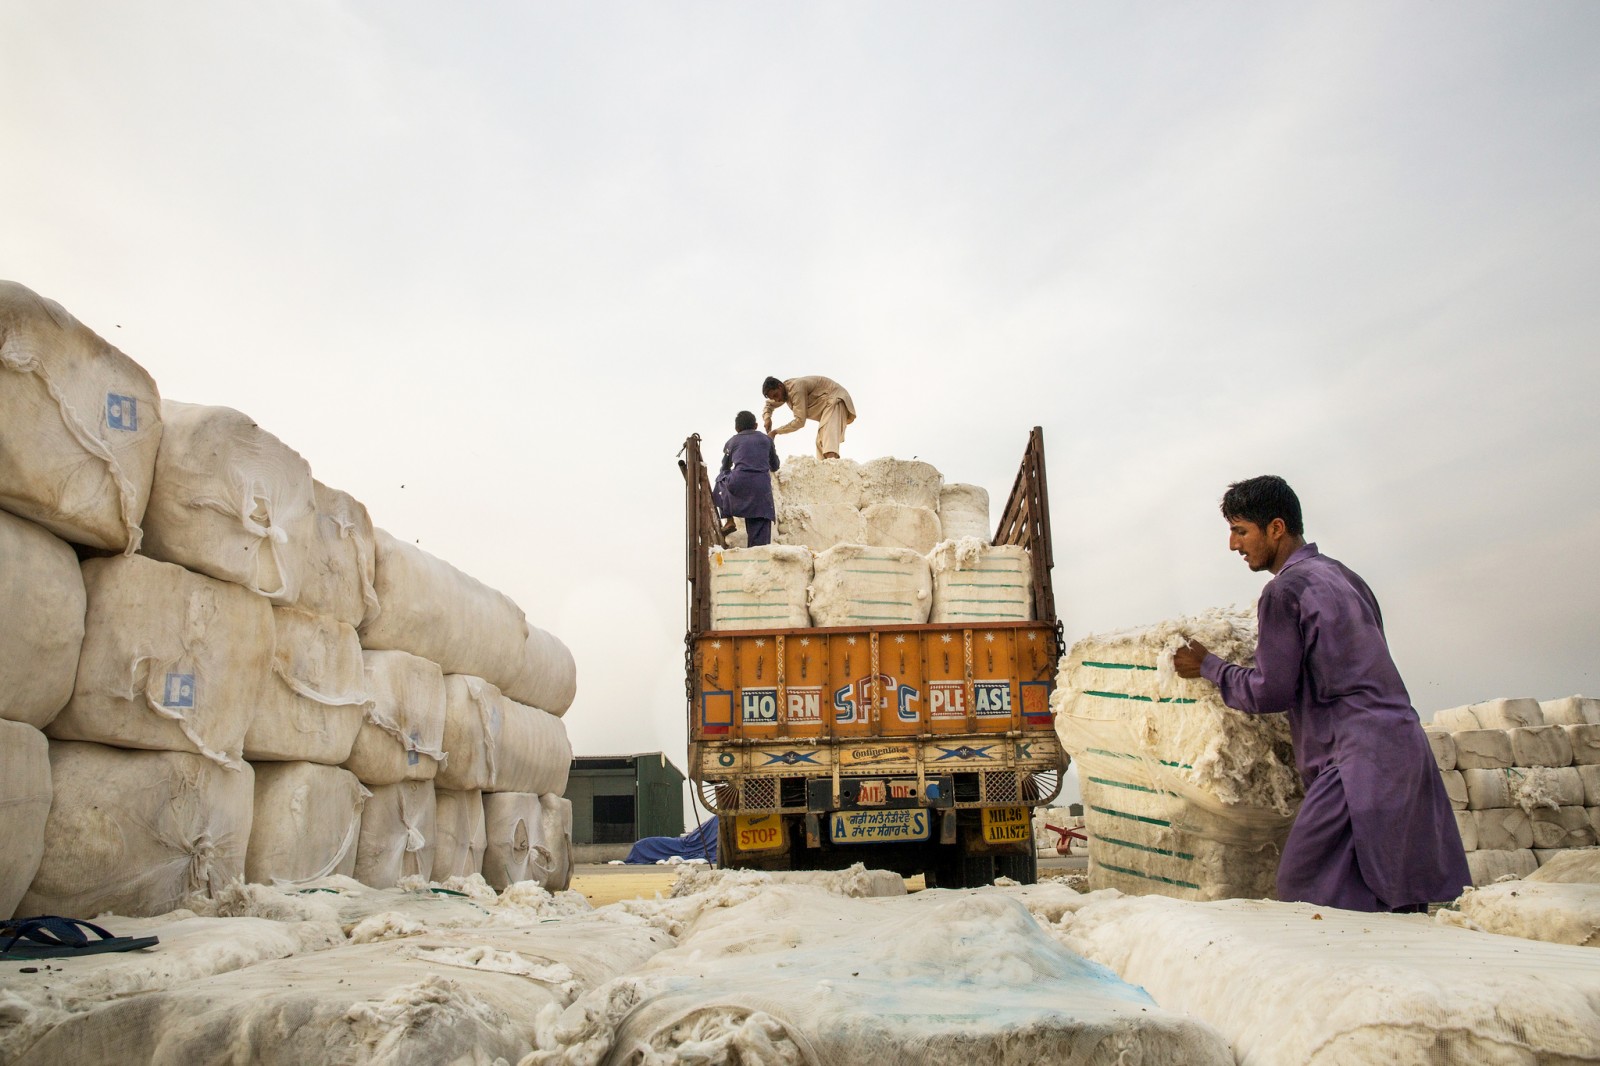 Workers unload cotton bales at the Wagah-Attari Cargo Terminal on the border of India and Pakistan. Dry conditions in Pakistan during the past year wilted crops and forced the textile industry to import $US 4 billion of cotton. Photo courtesy Asian Development Bank via Flickr Creative Commons 